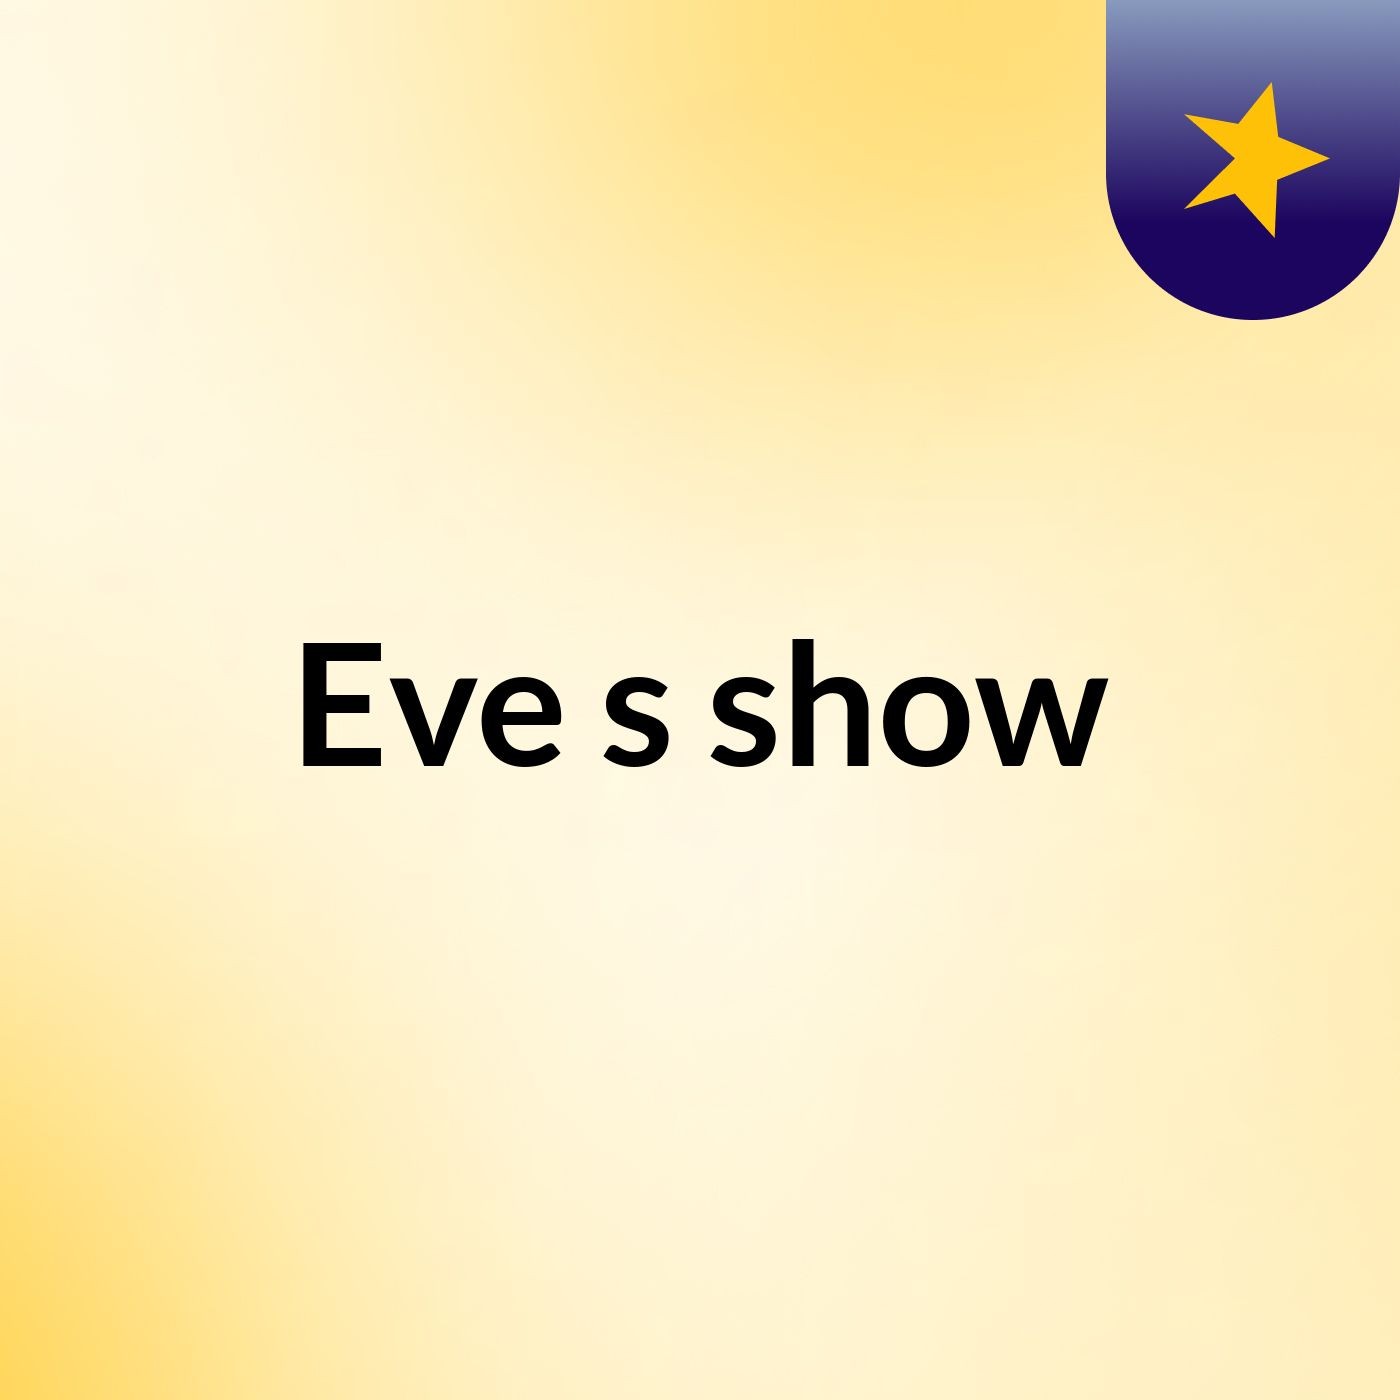 Eve's show